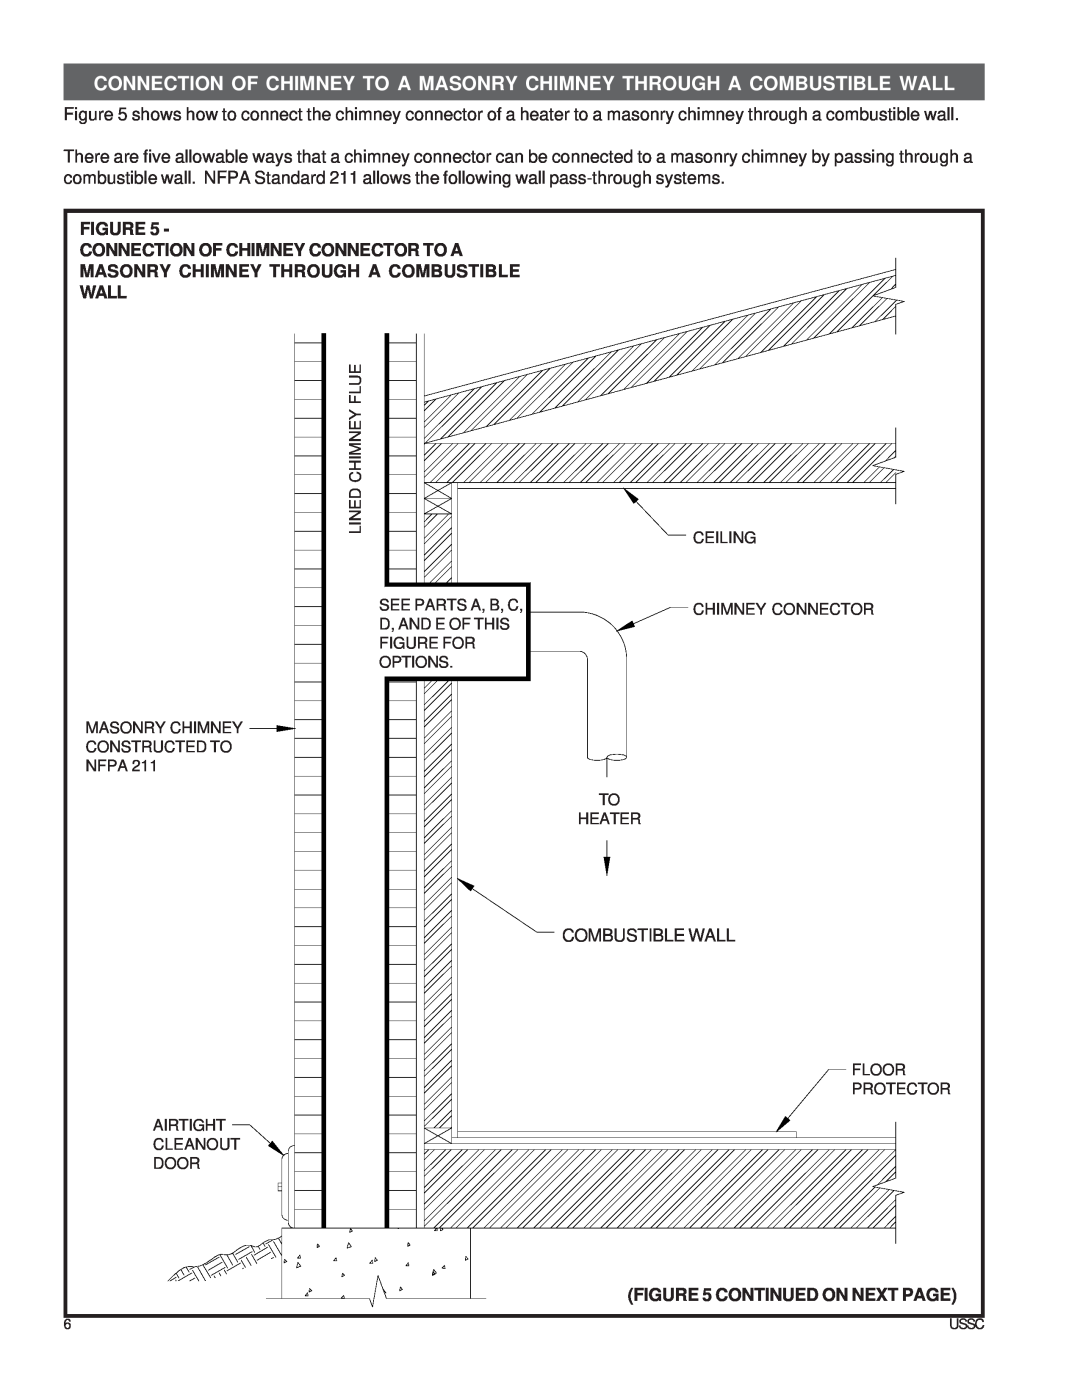 United States Stove ASA7, 4027 Figure Connection Of Chimney Connector To A, Masonry Chimney Through A Combustible Wall 